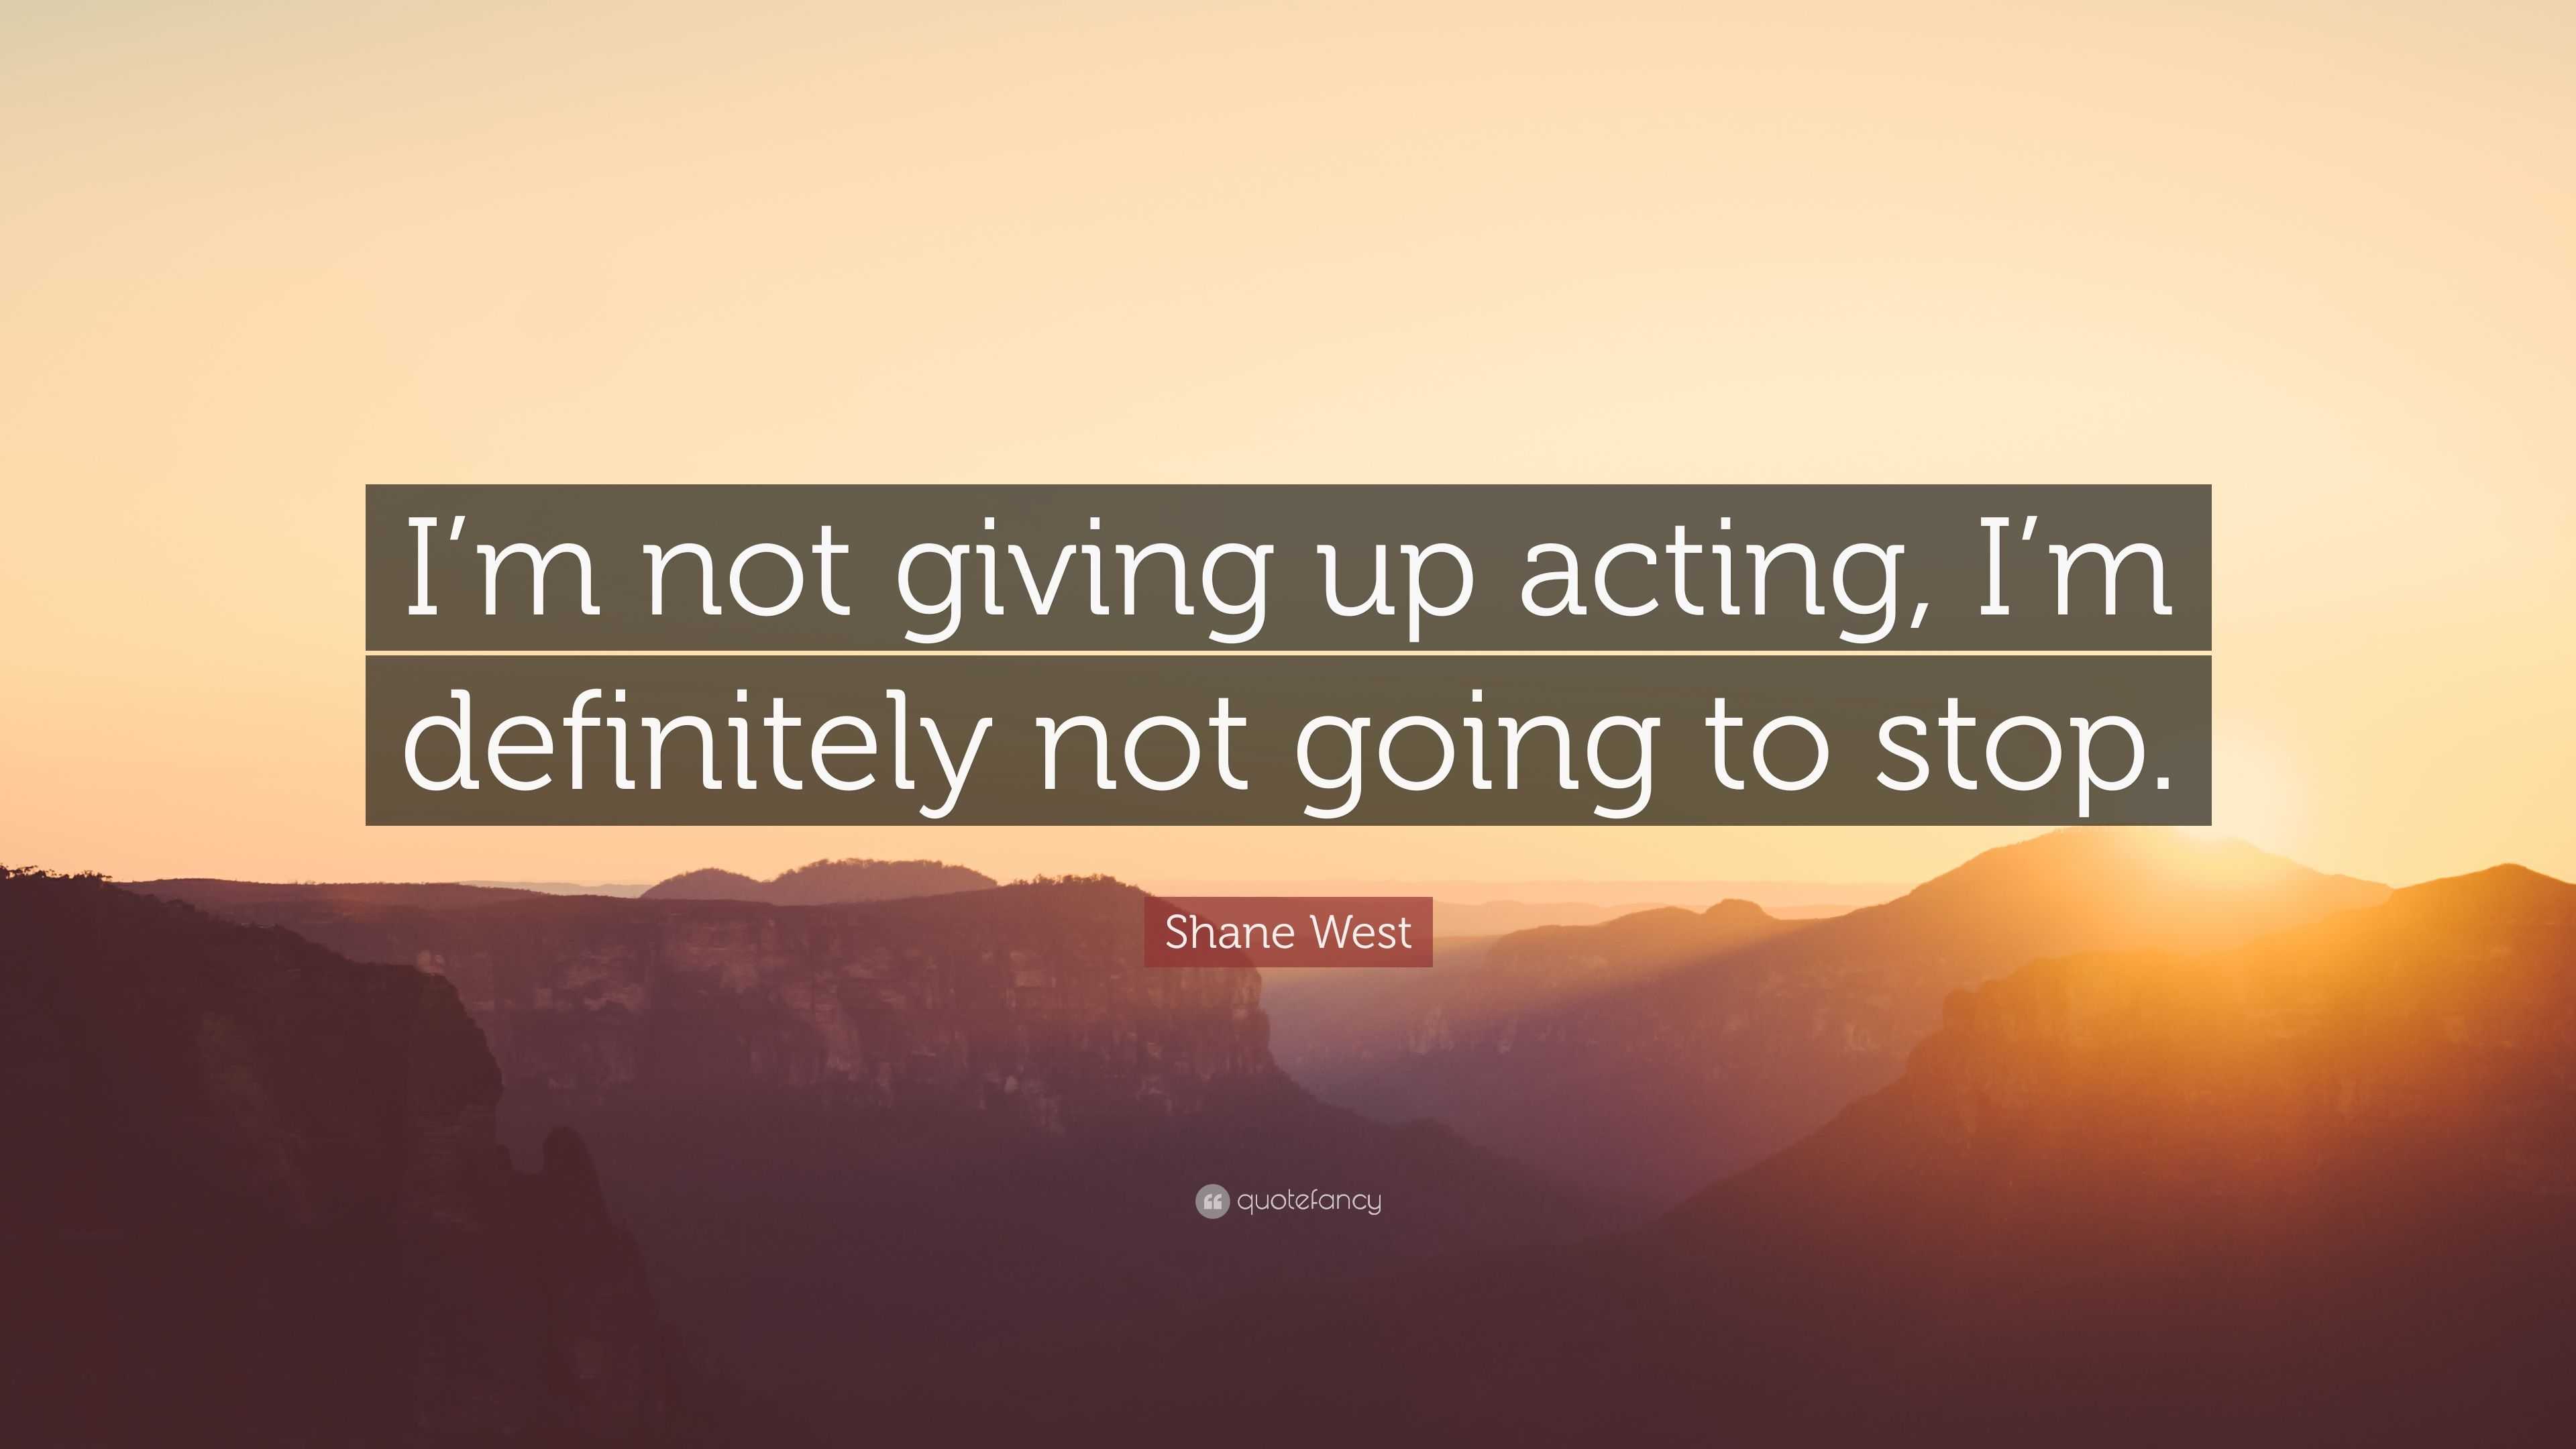 Shane West Quote: “I’m not giving up acting, I’m definitely not going ...